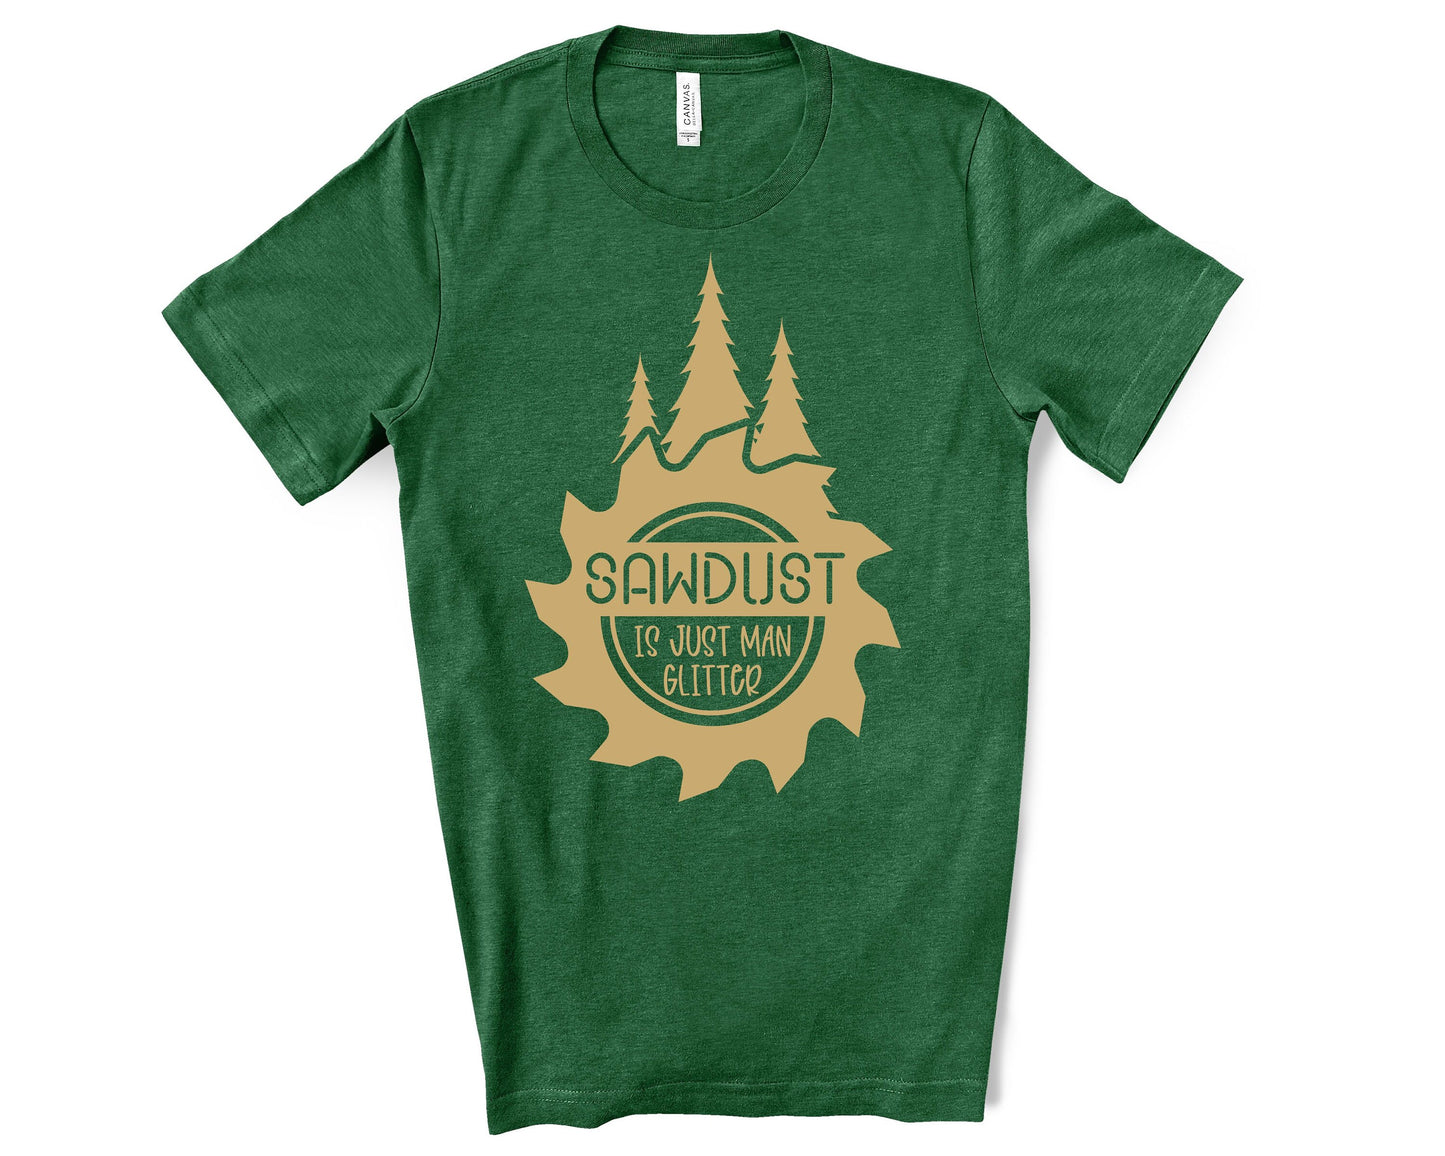 Sawdust is Just Man Glitter T-Shirt, Father's Day Shirt, Dad Shirt, Unique Dad Gifts, Woodworking Shirt, Lumberjack Shirt